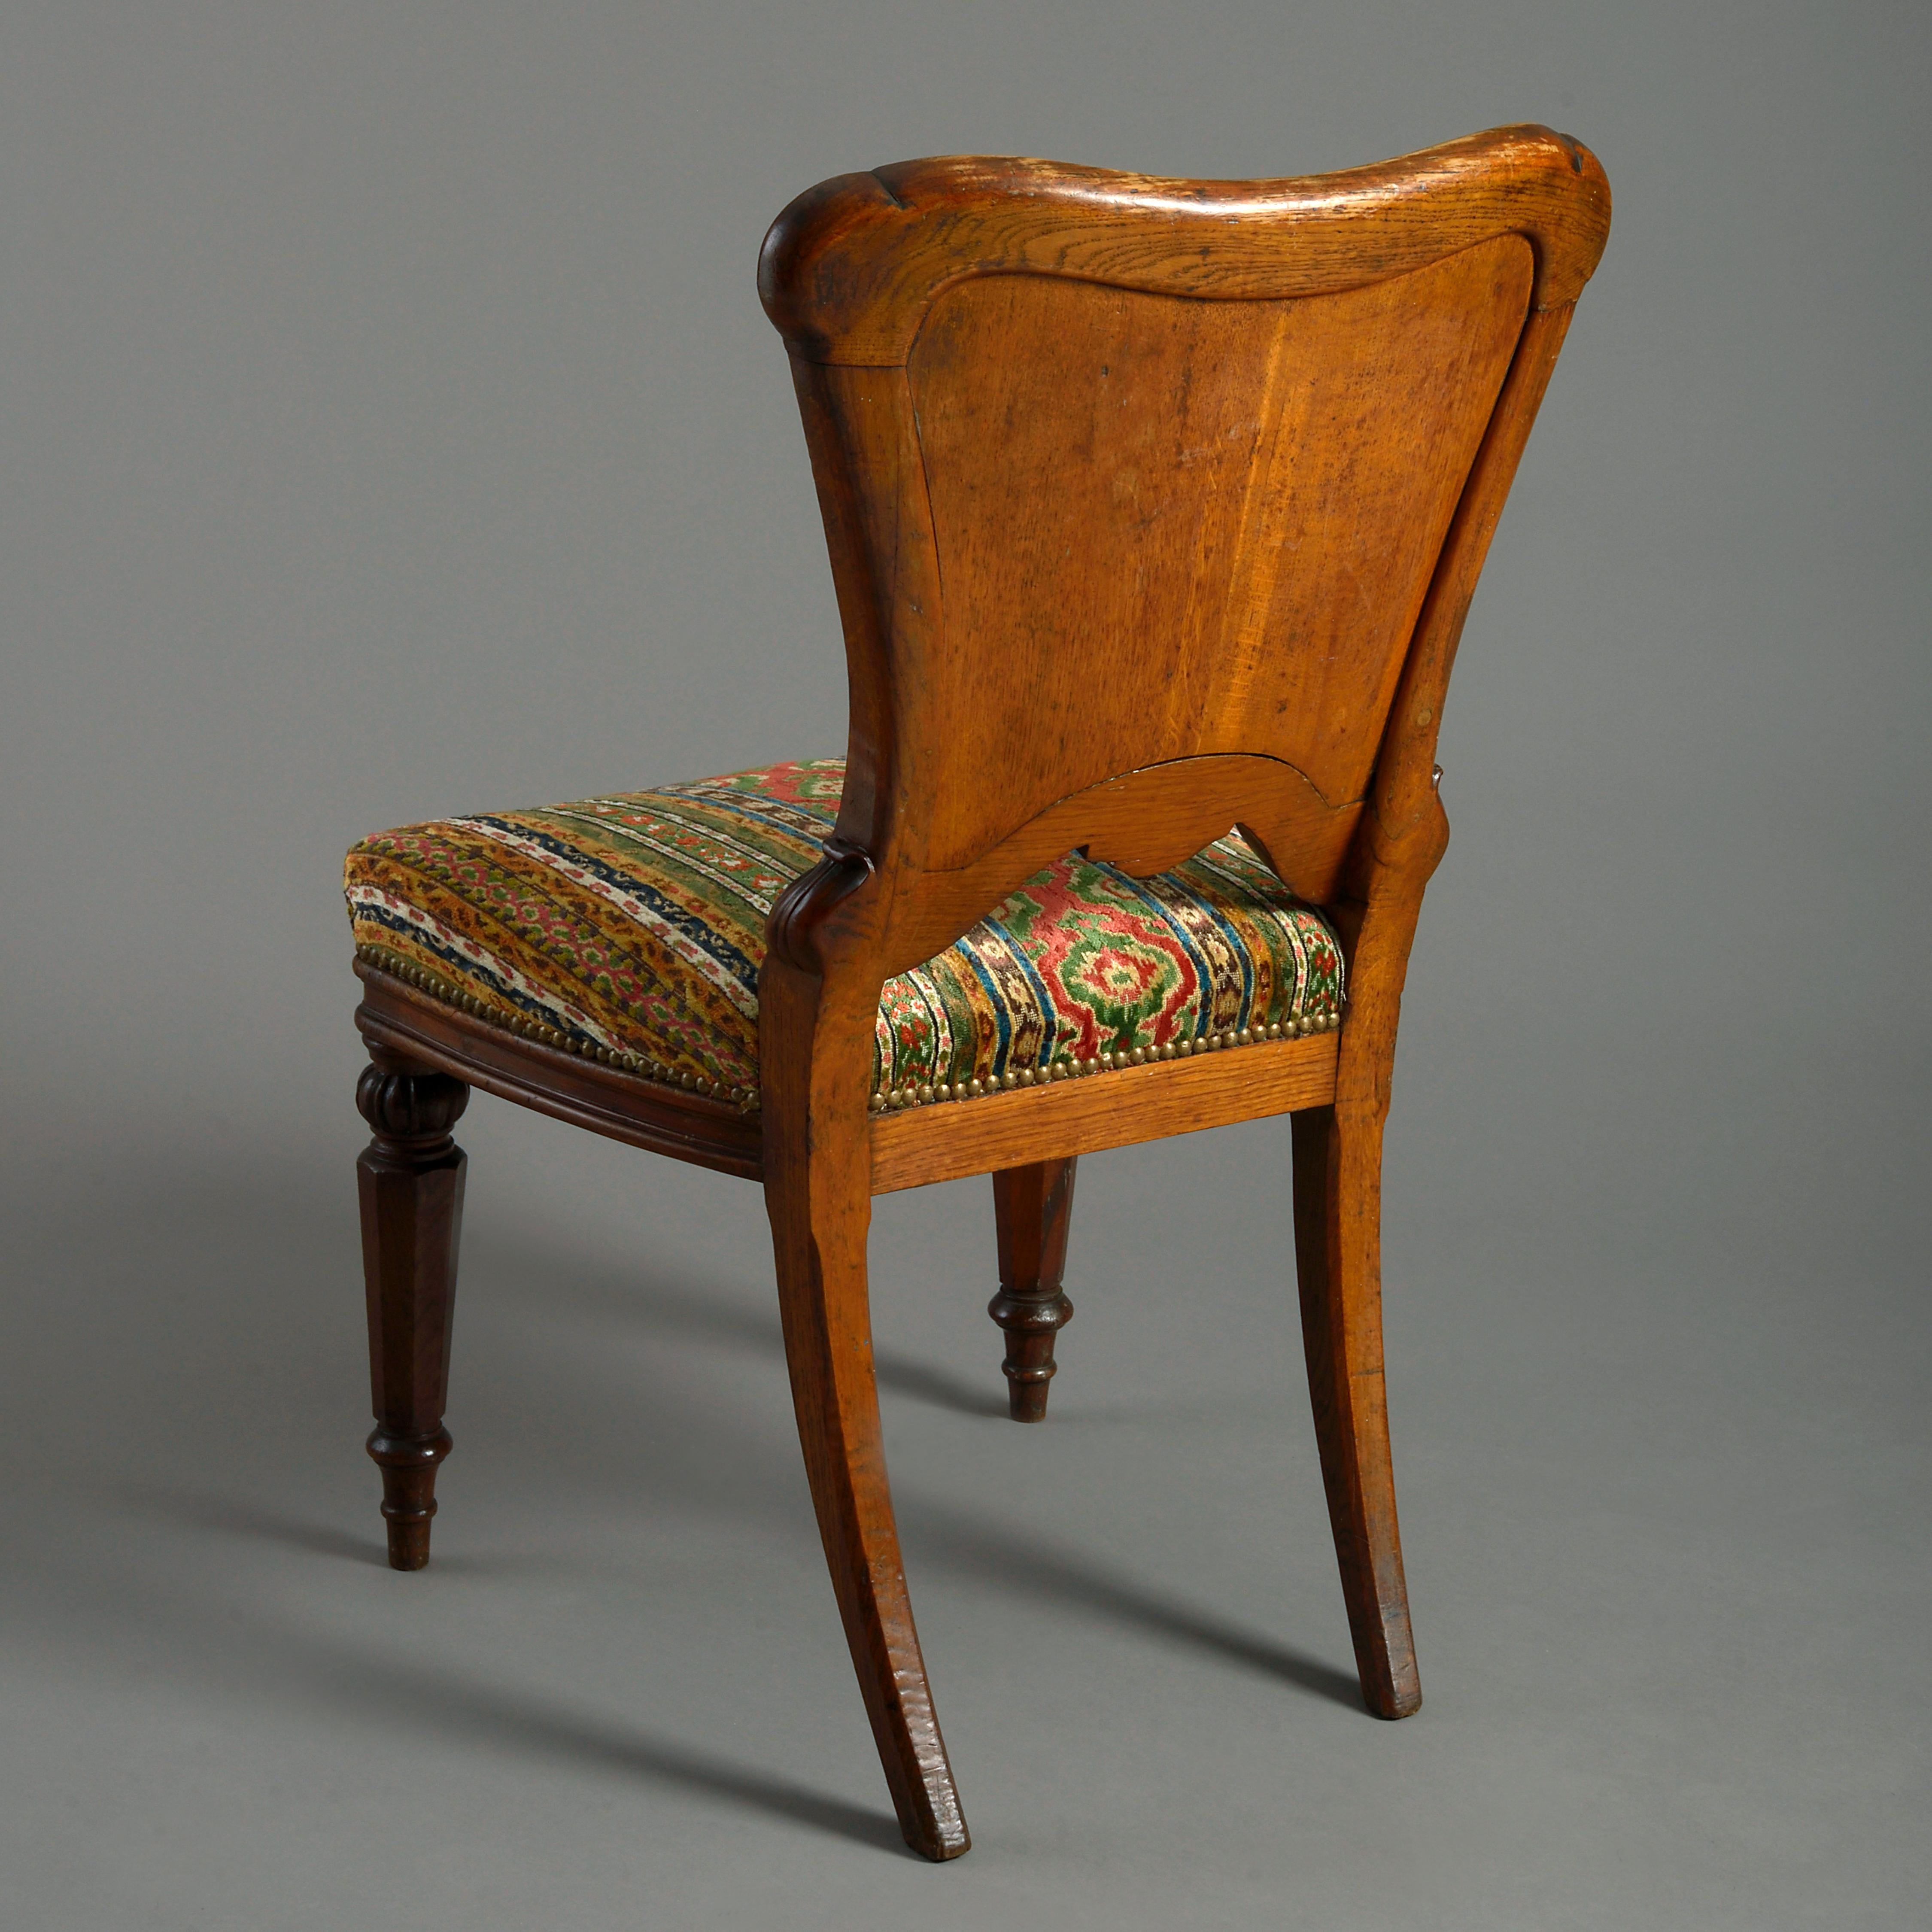 English Mid-19th Century Victorian Period Oak Side Chair For Sale